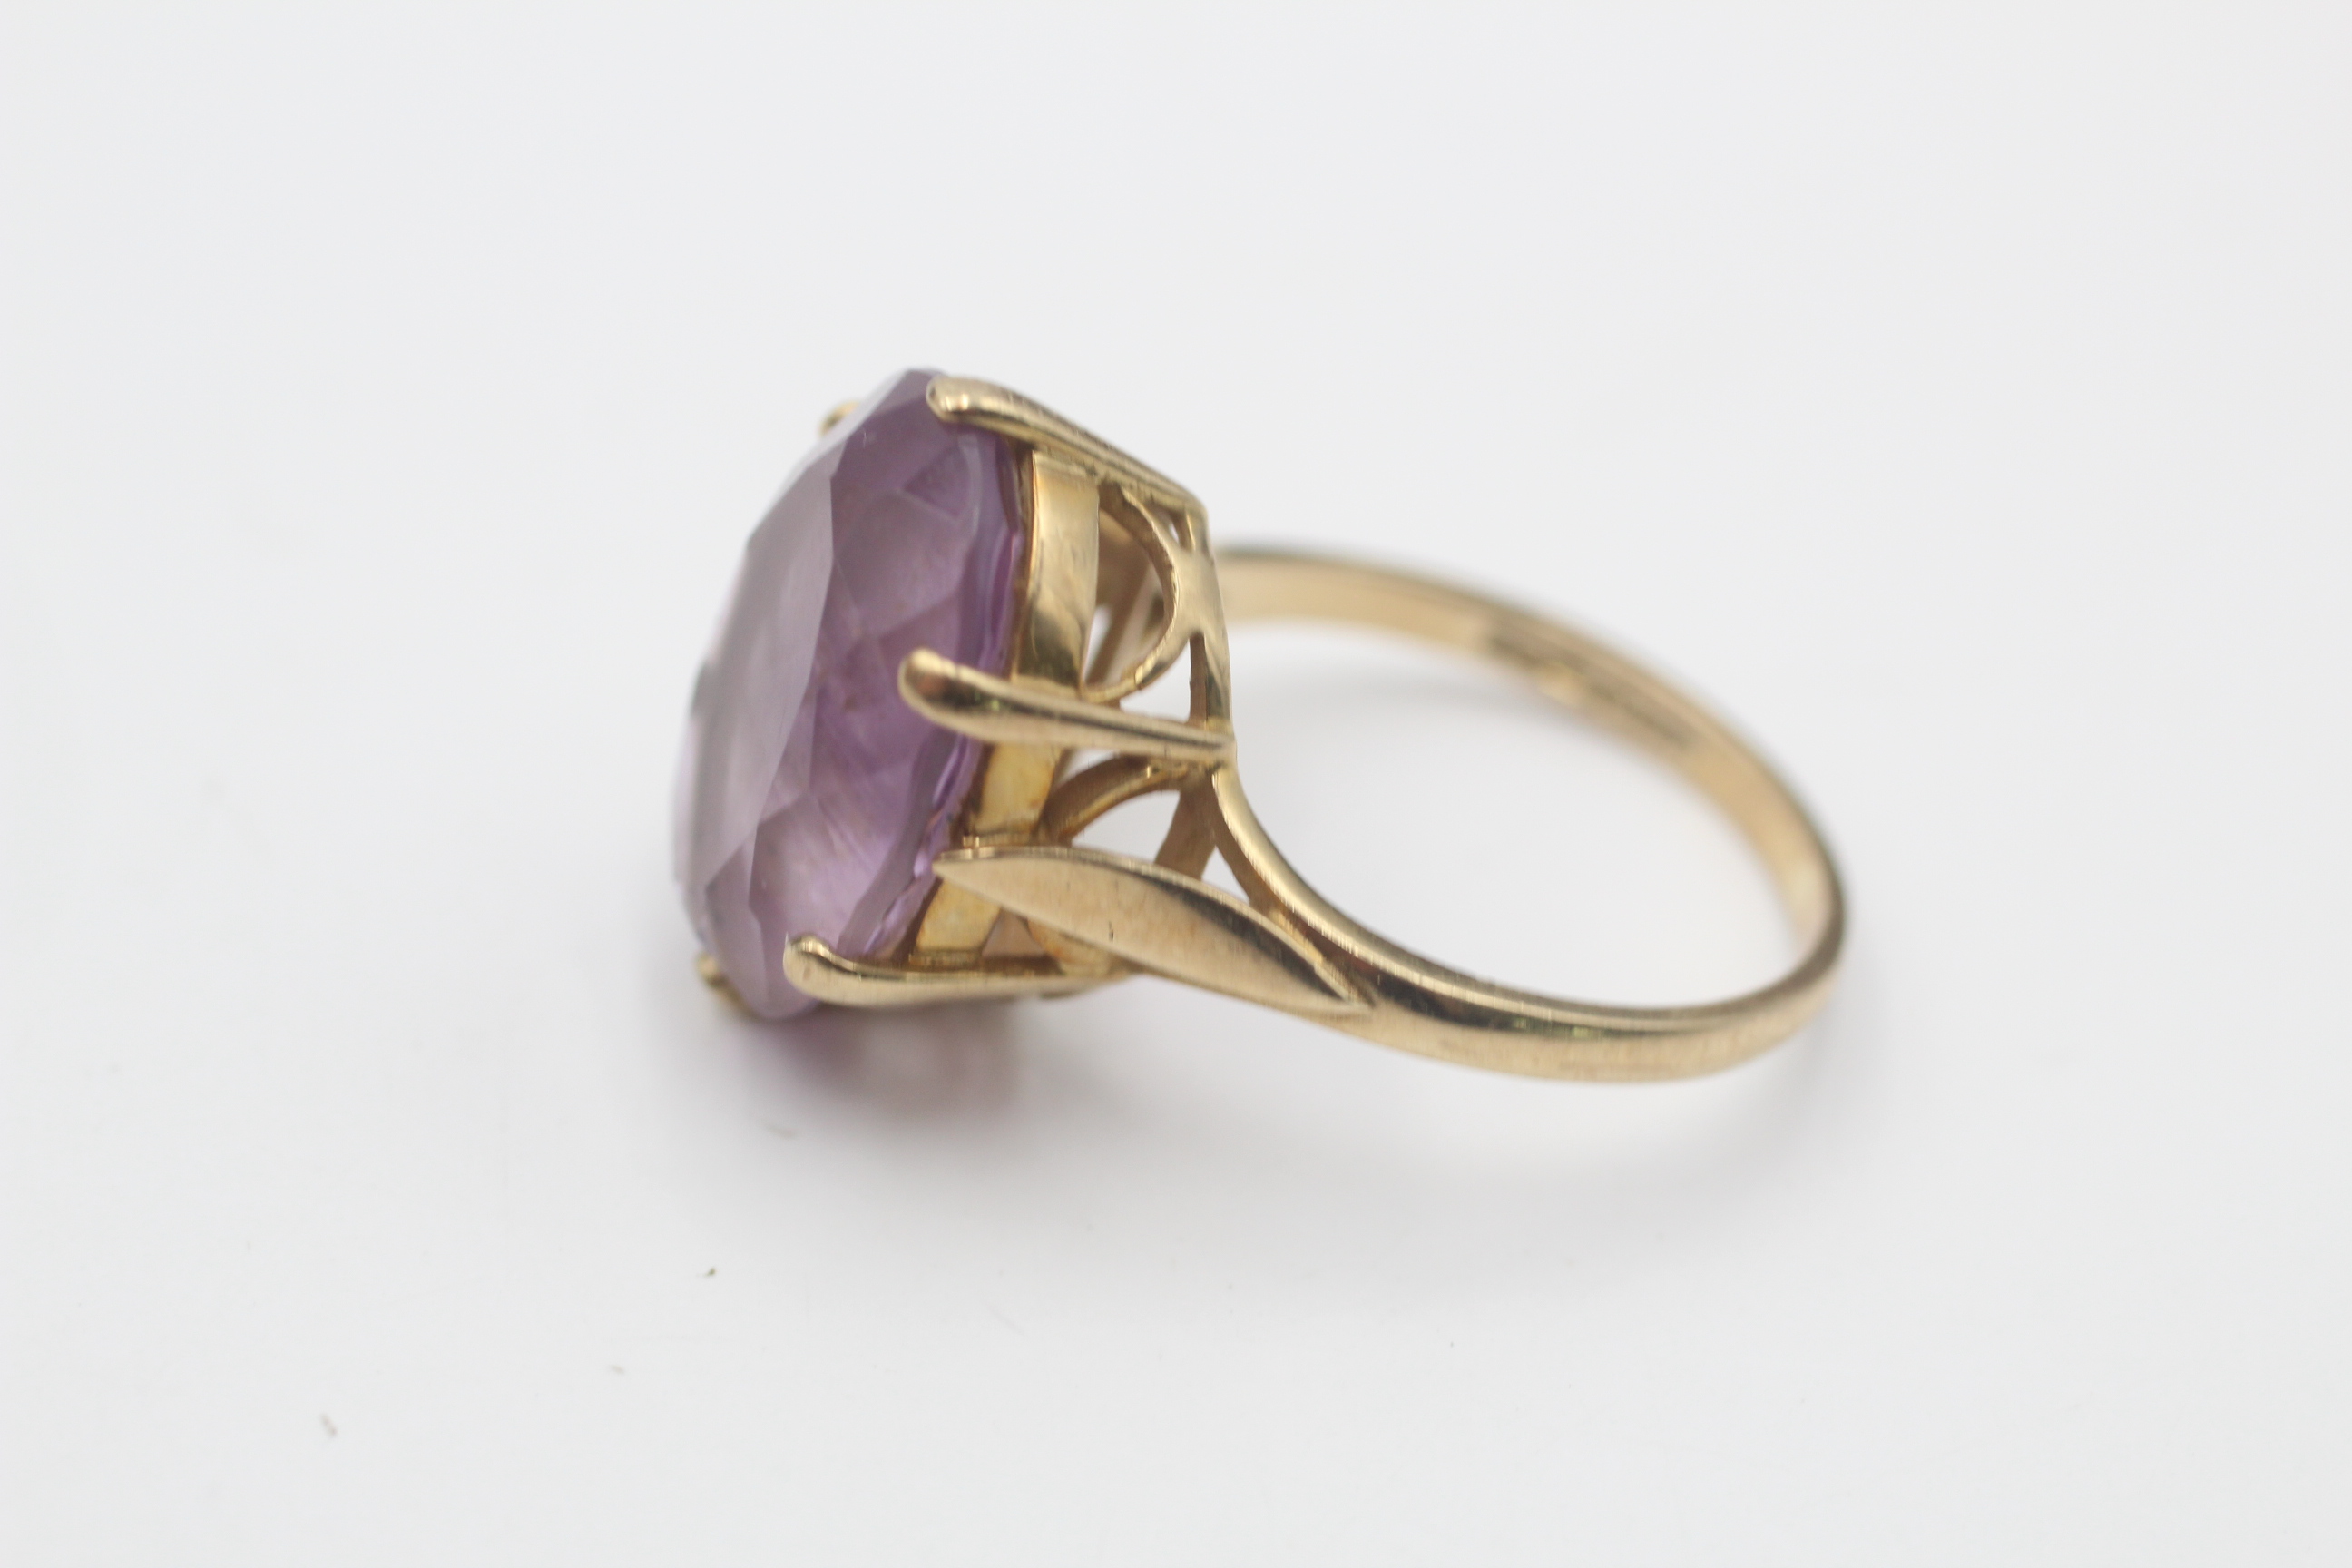 9ct gold vintage amethyst solitaire cocktail ring (4.5g) - Image 2 of 5